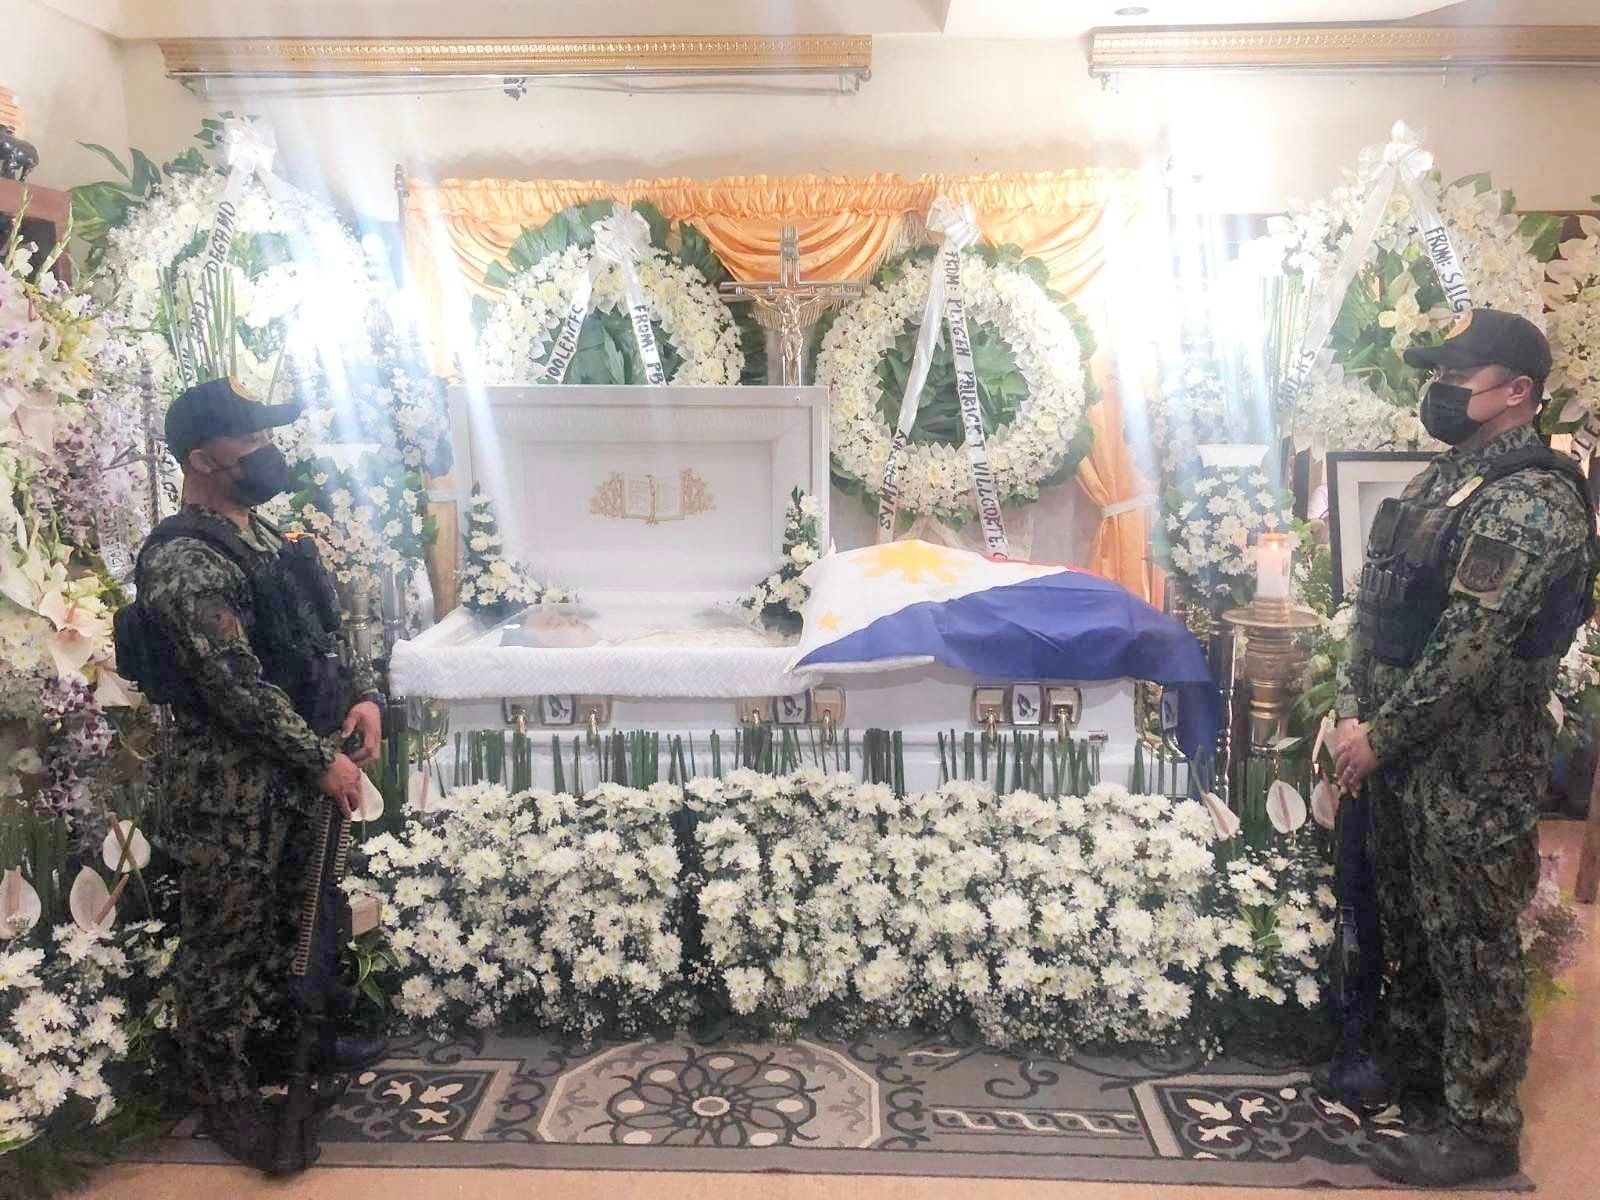 Arnie Teves: ‘We don’t benefit from governor’s death’